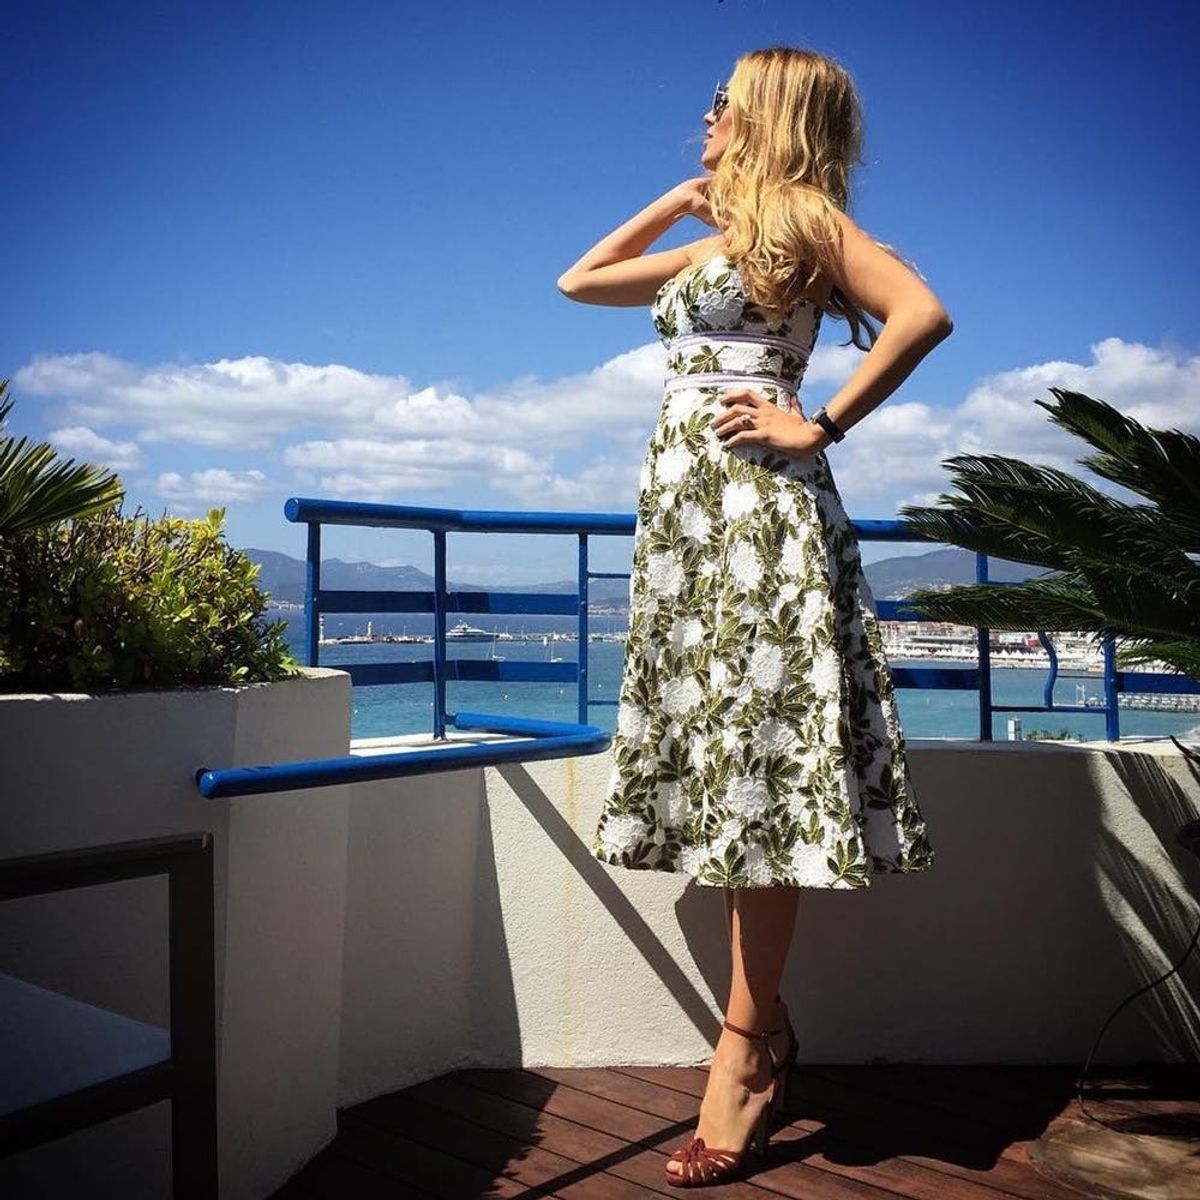 9 Things Blake Lively Has Taught Us About Maternity Style